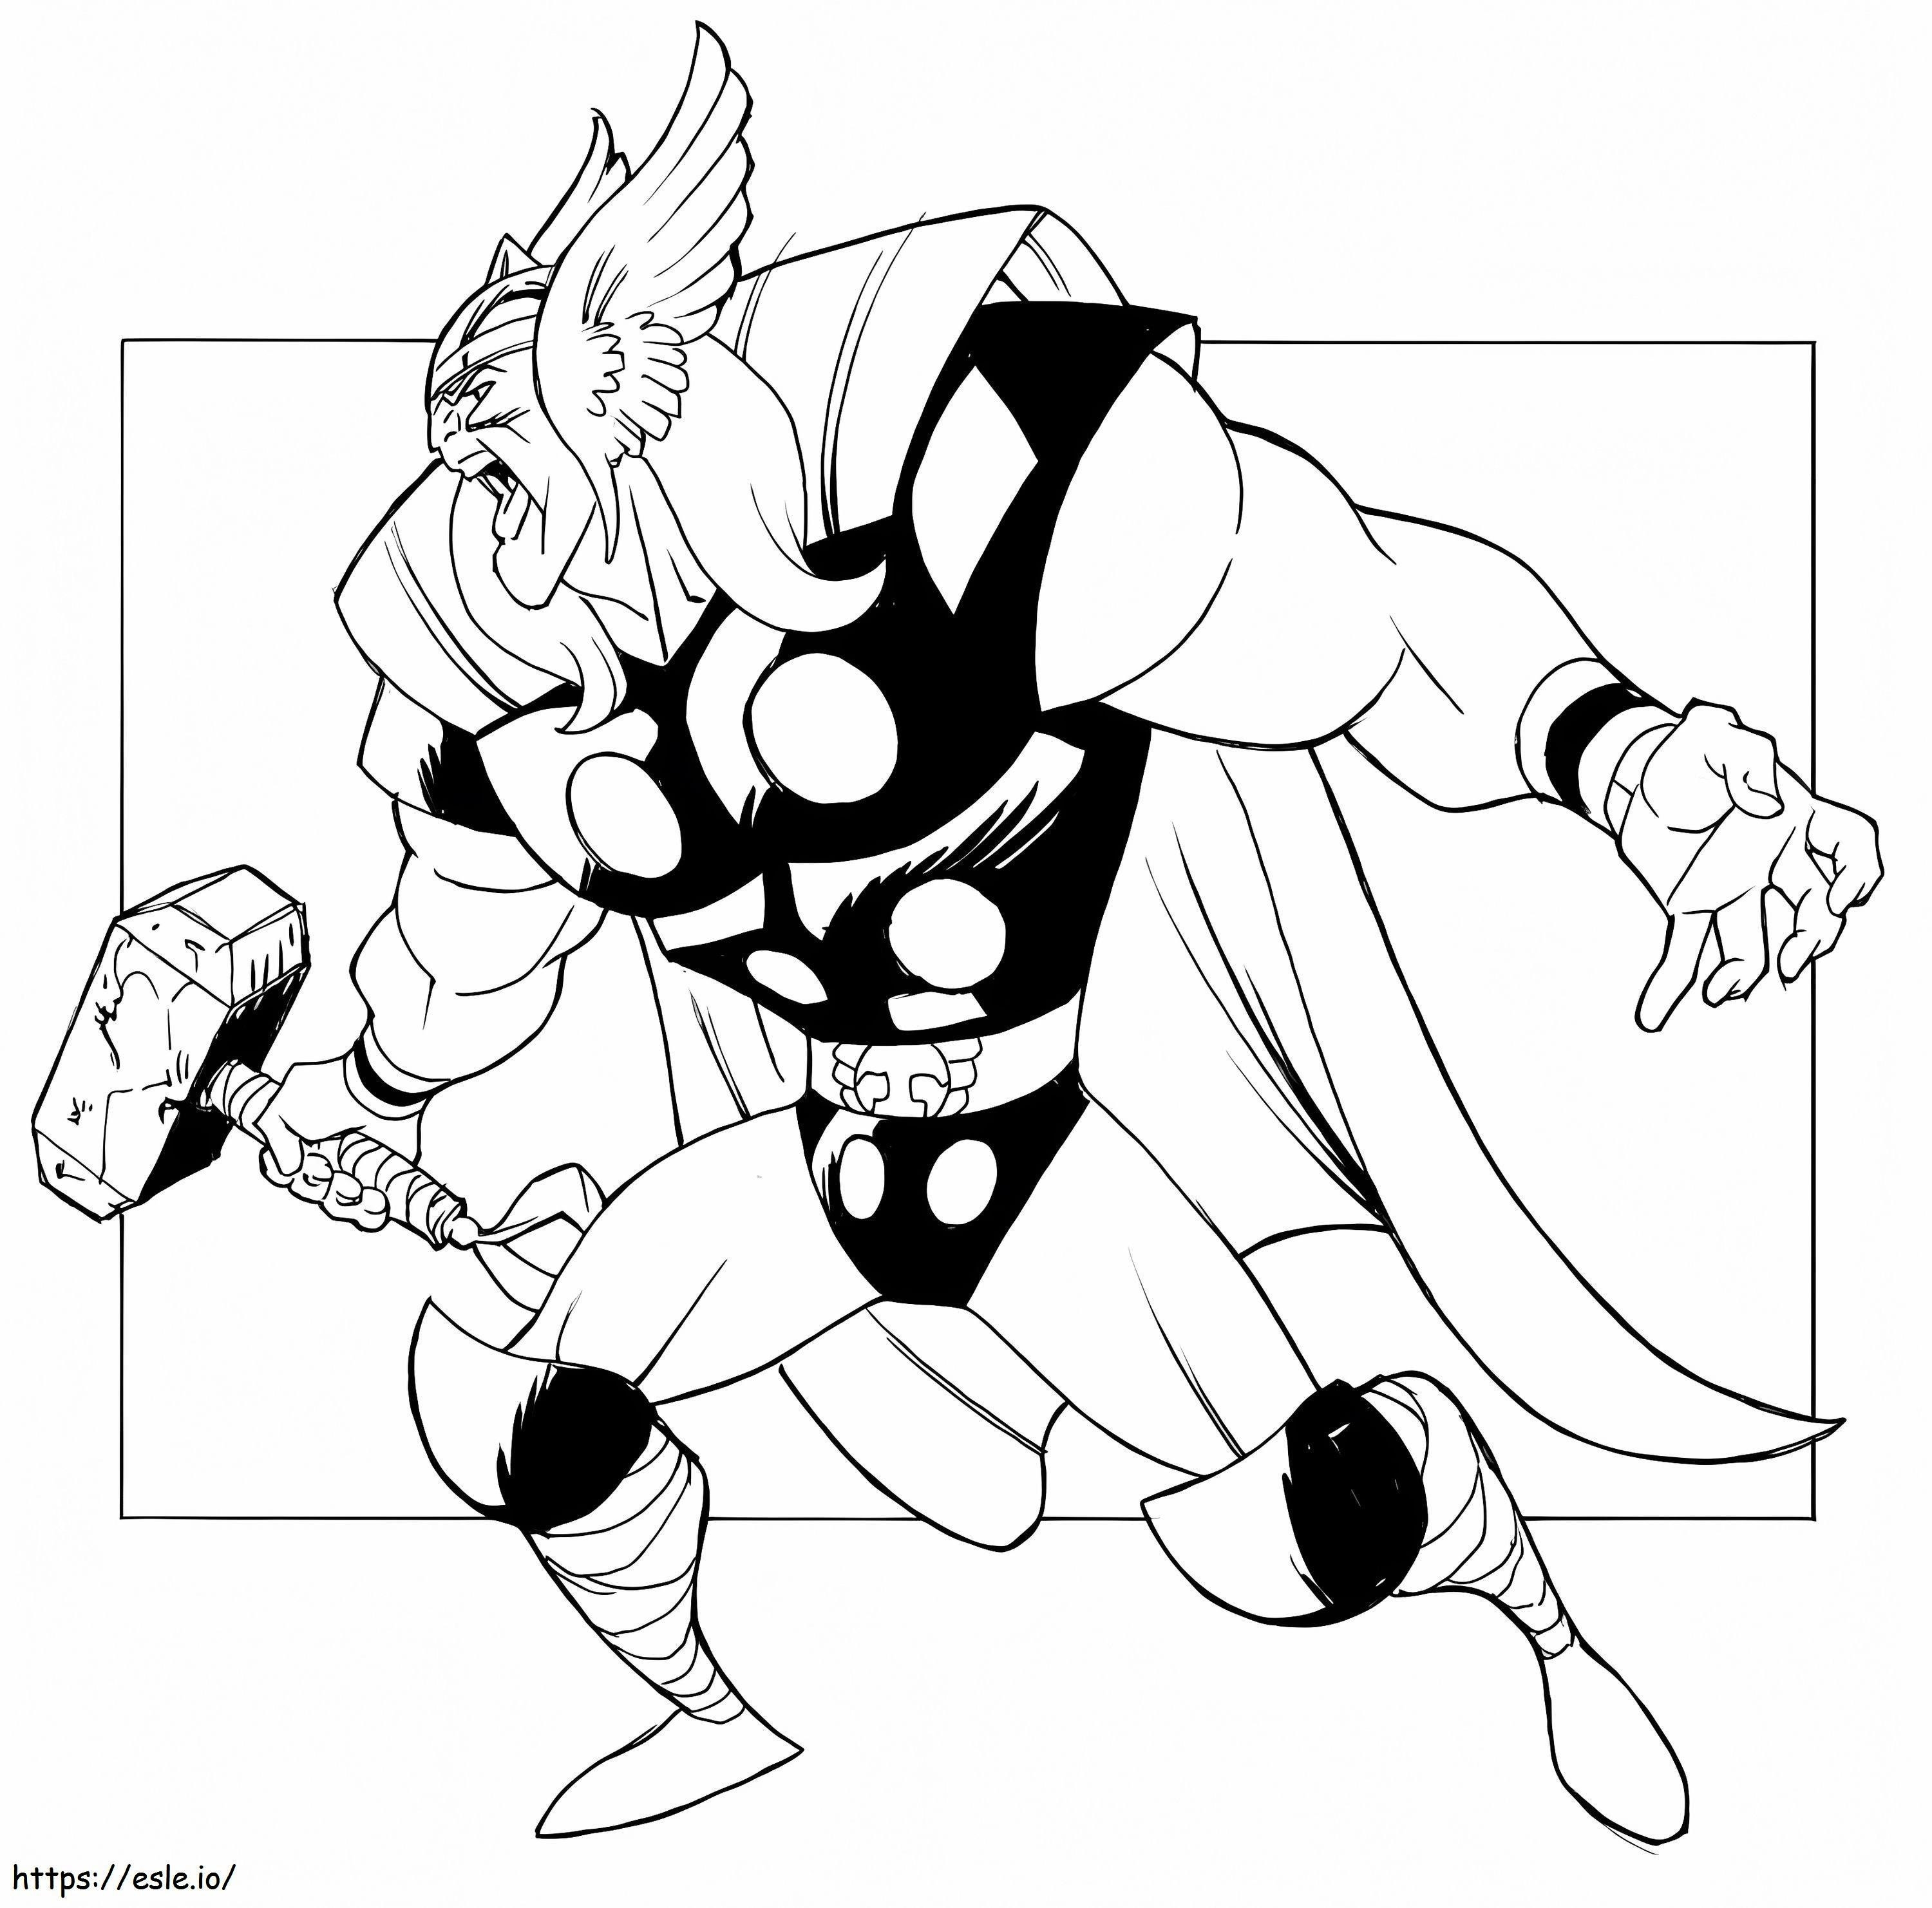 Thor Is Angry coloring page